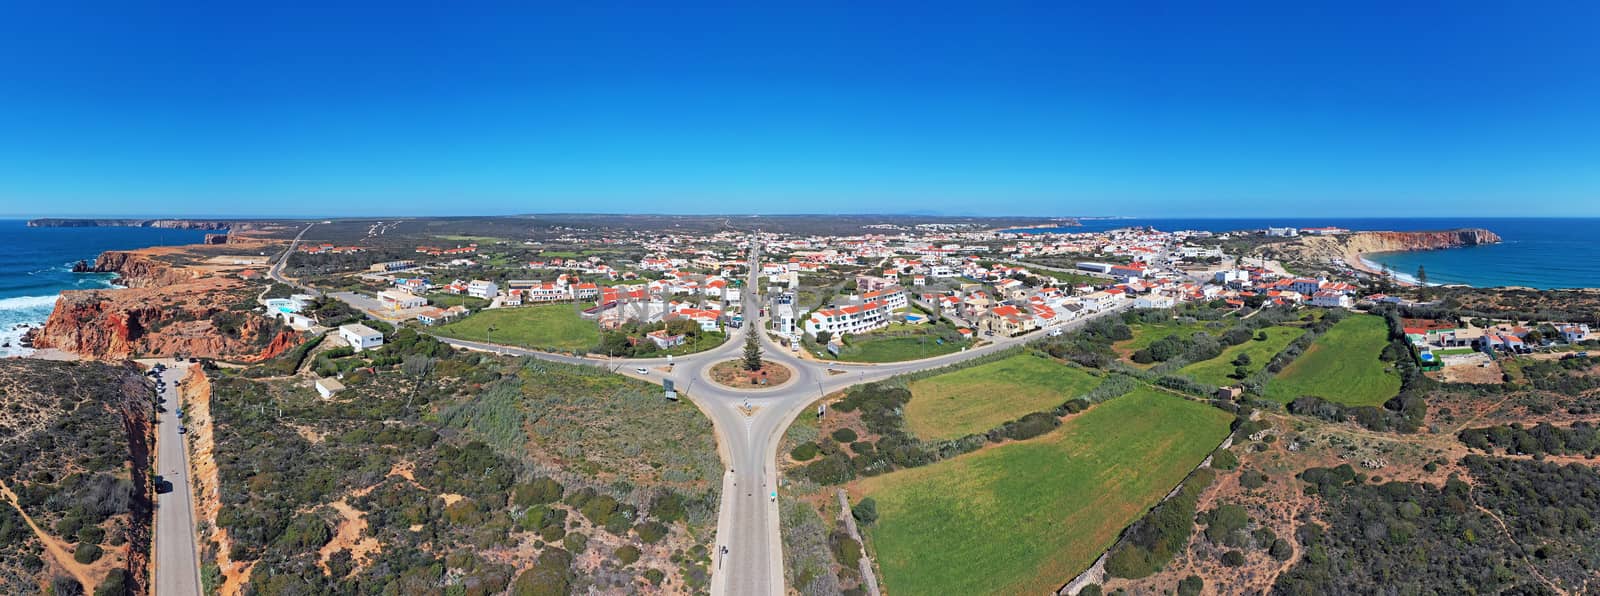 Aerial panorama from the village Sagres in the Algarve Portugal